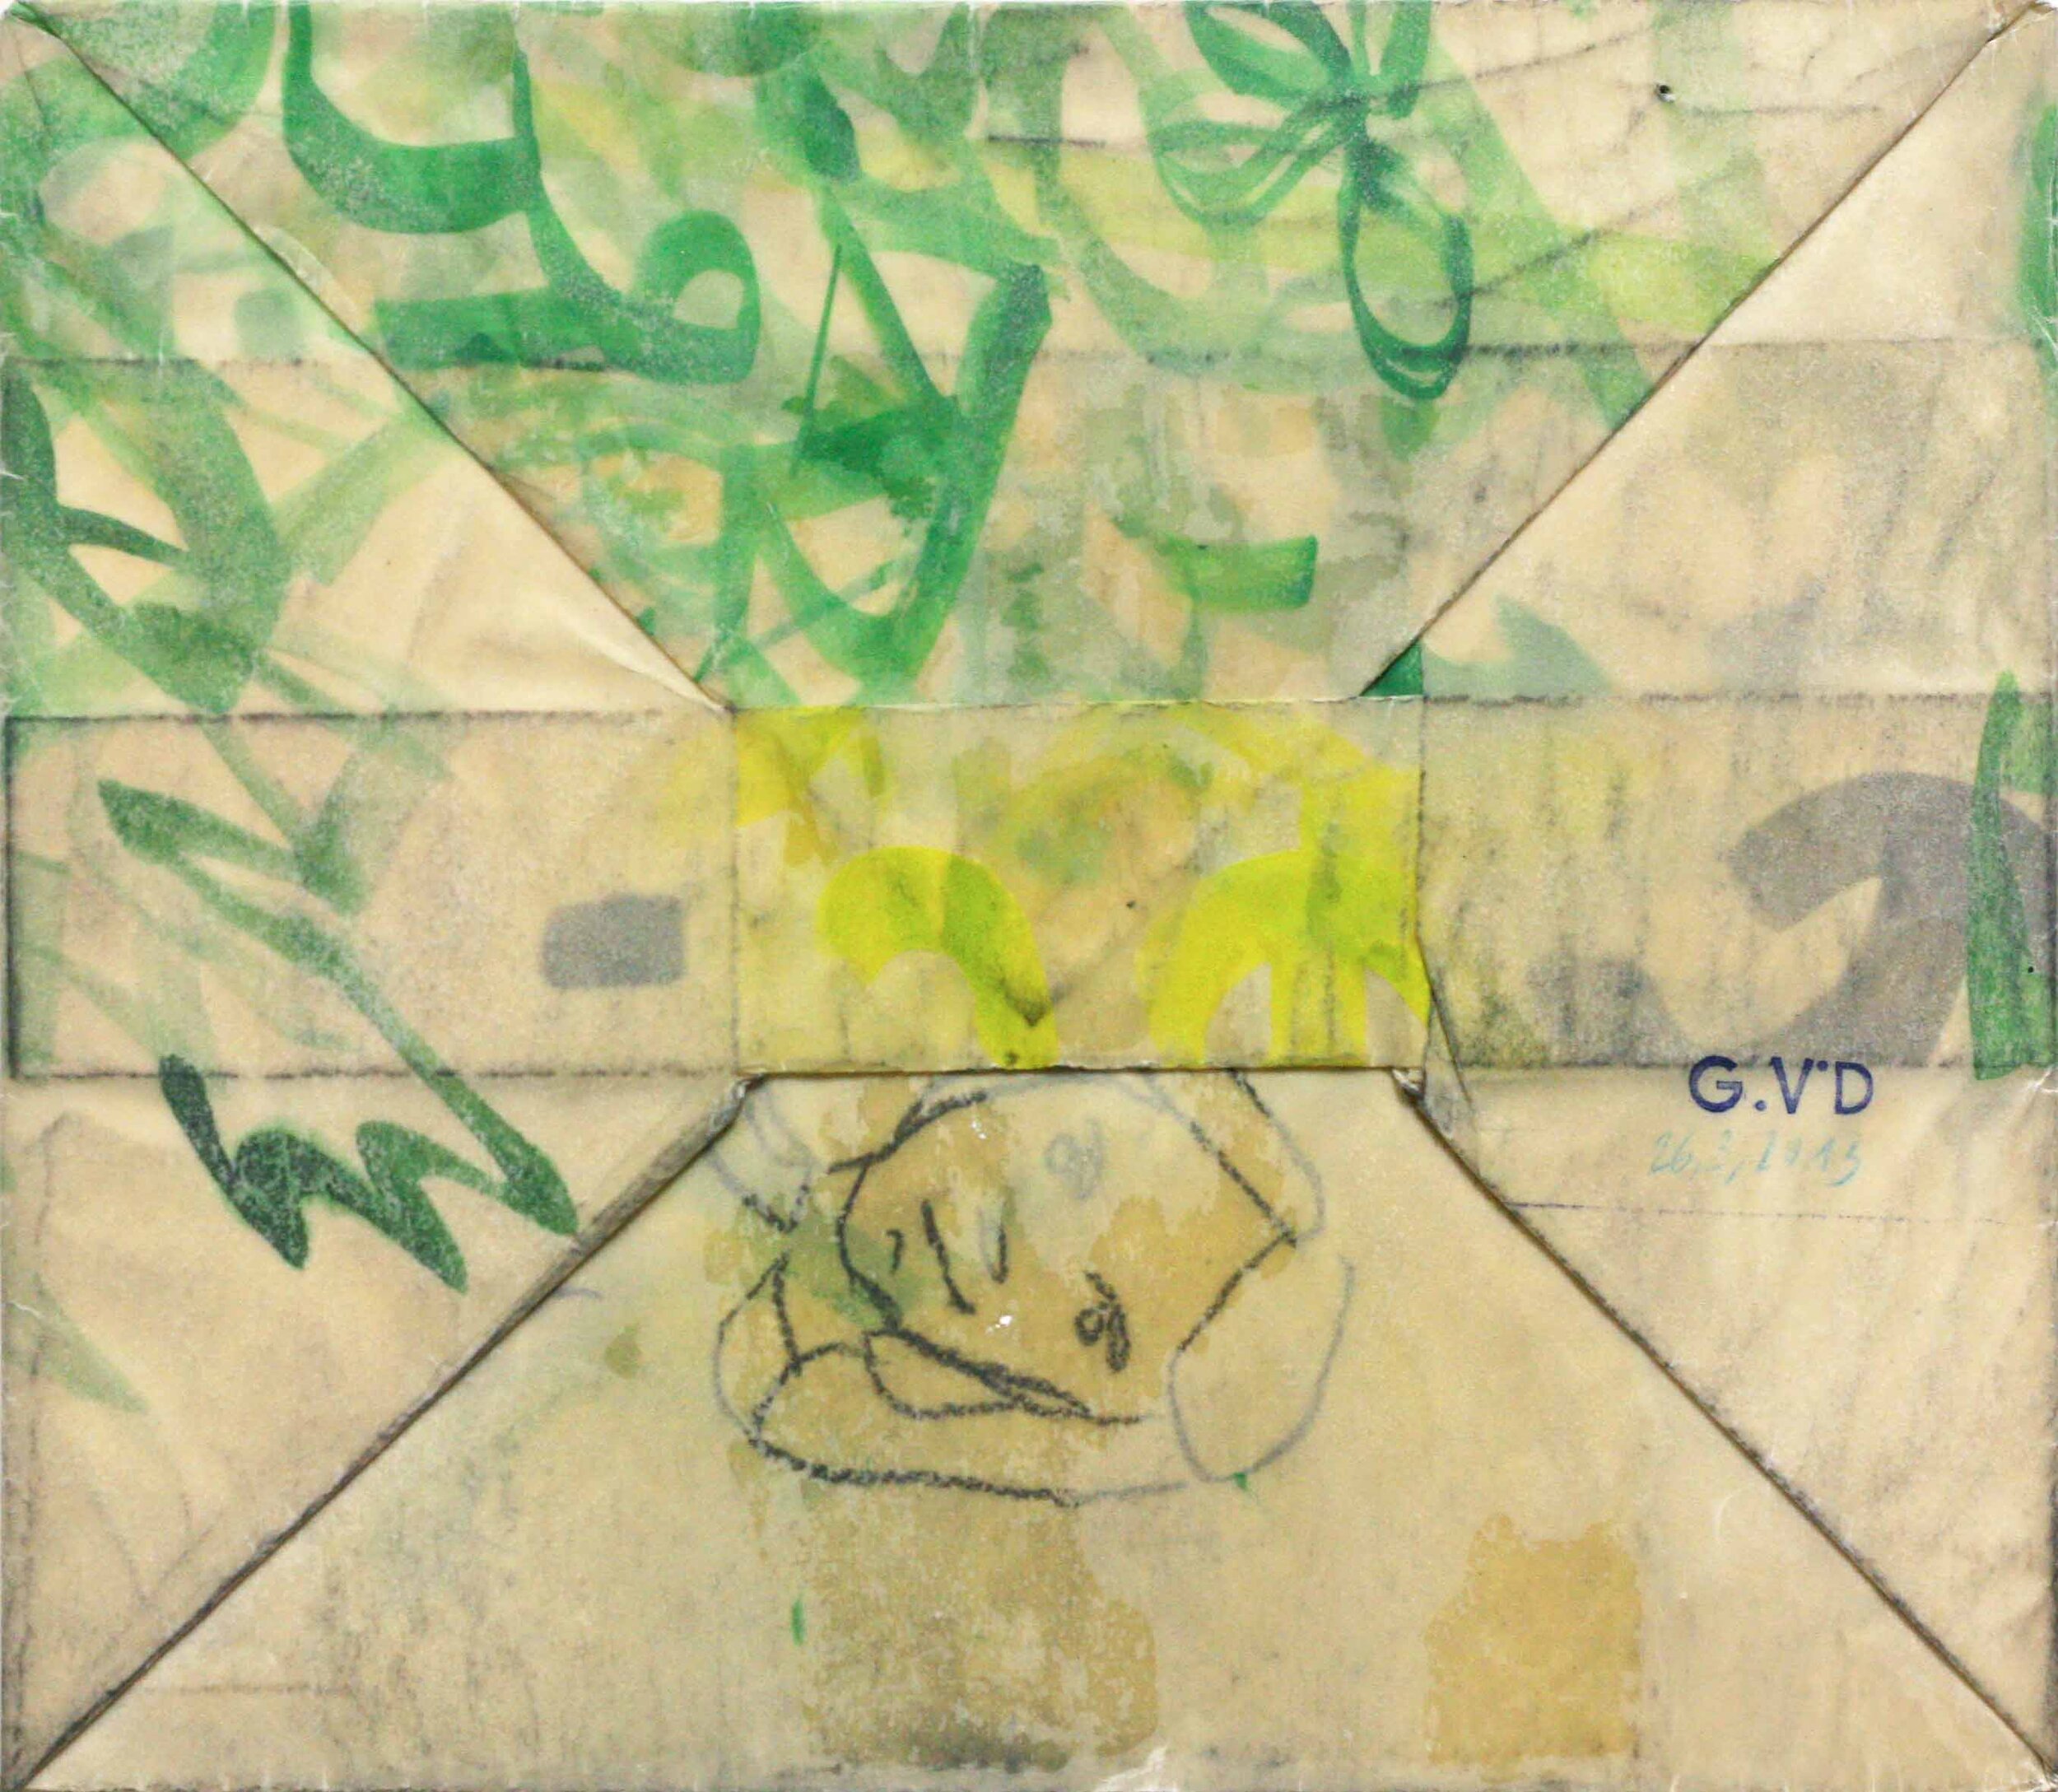  “Post / Udo Envelope (2)”, 27 × 30 cm, Aquarell, Pencil and Wax on Paper, 2013 